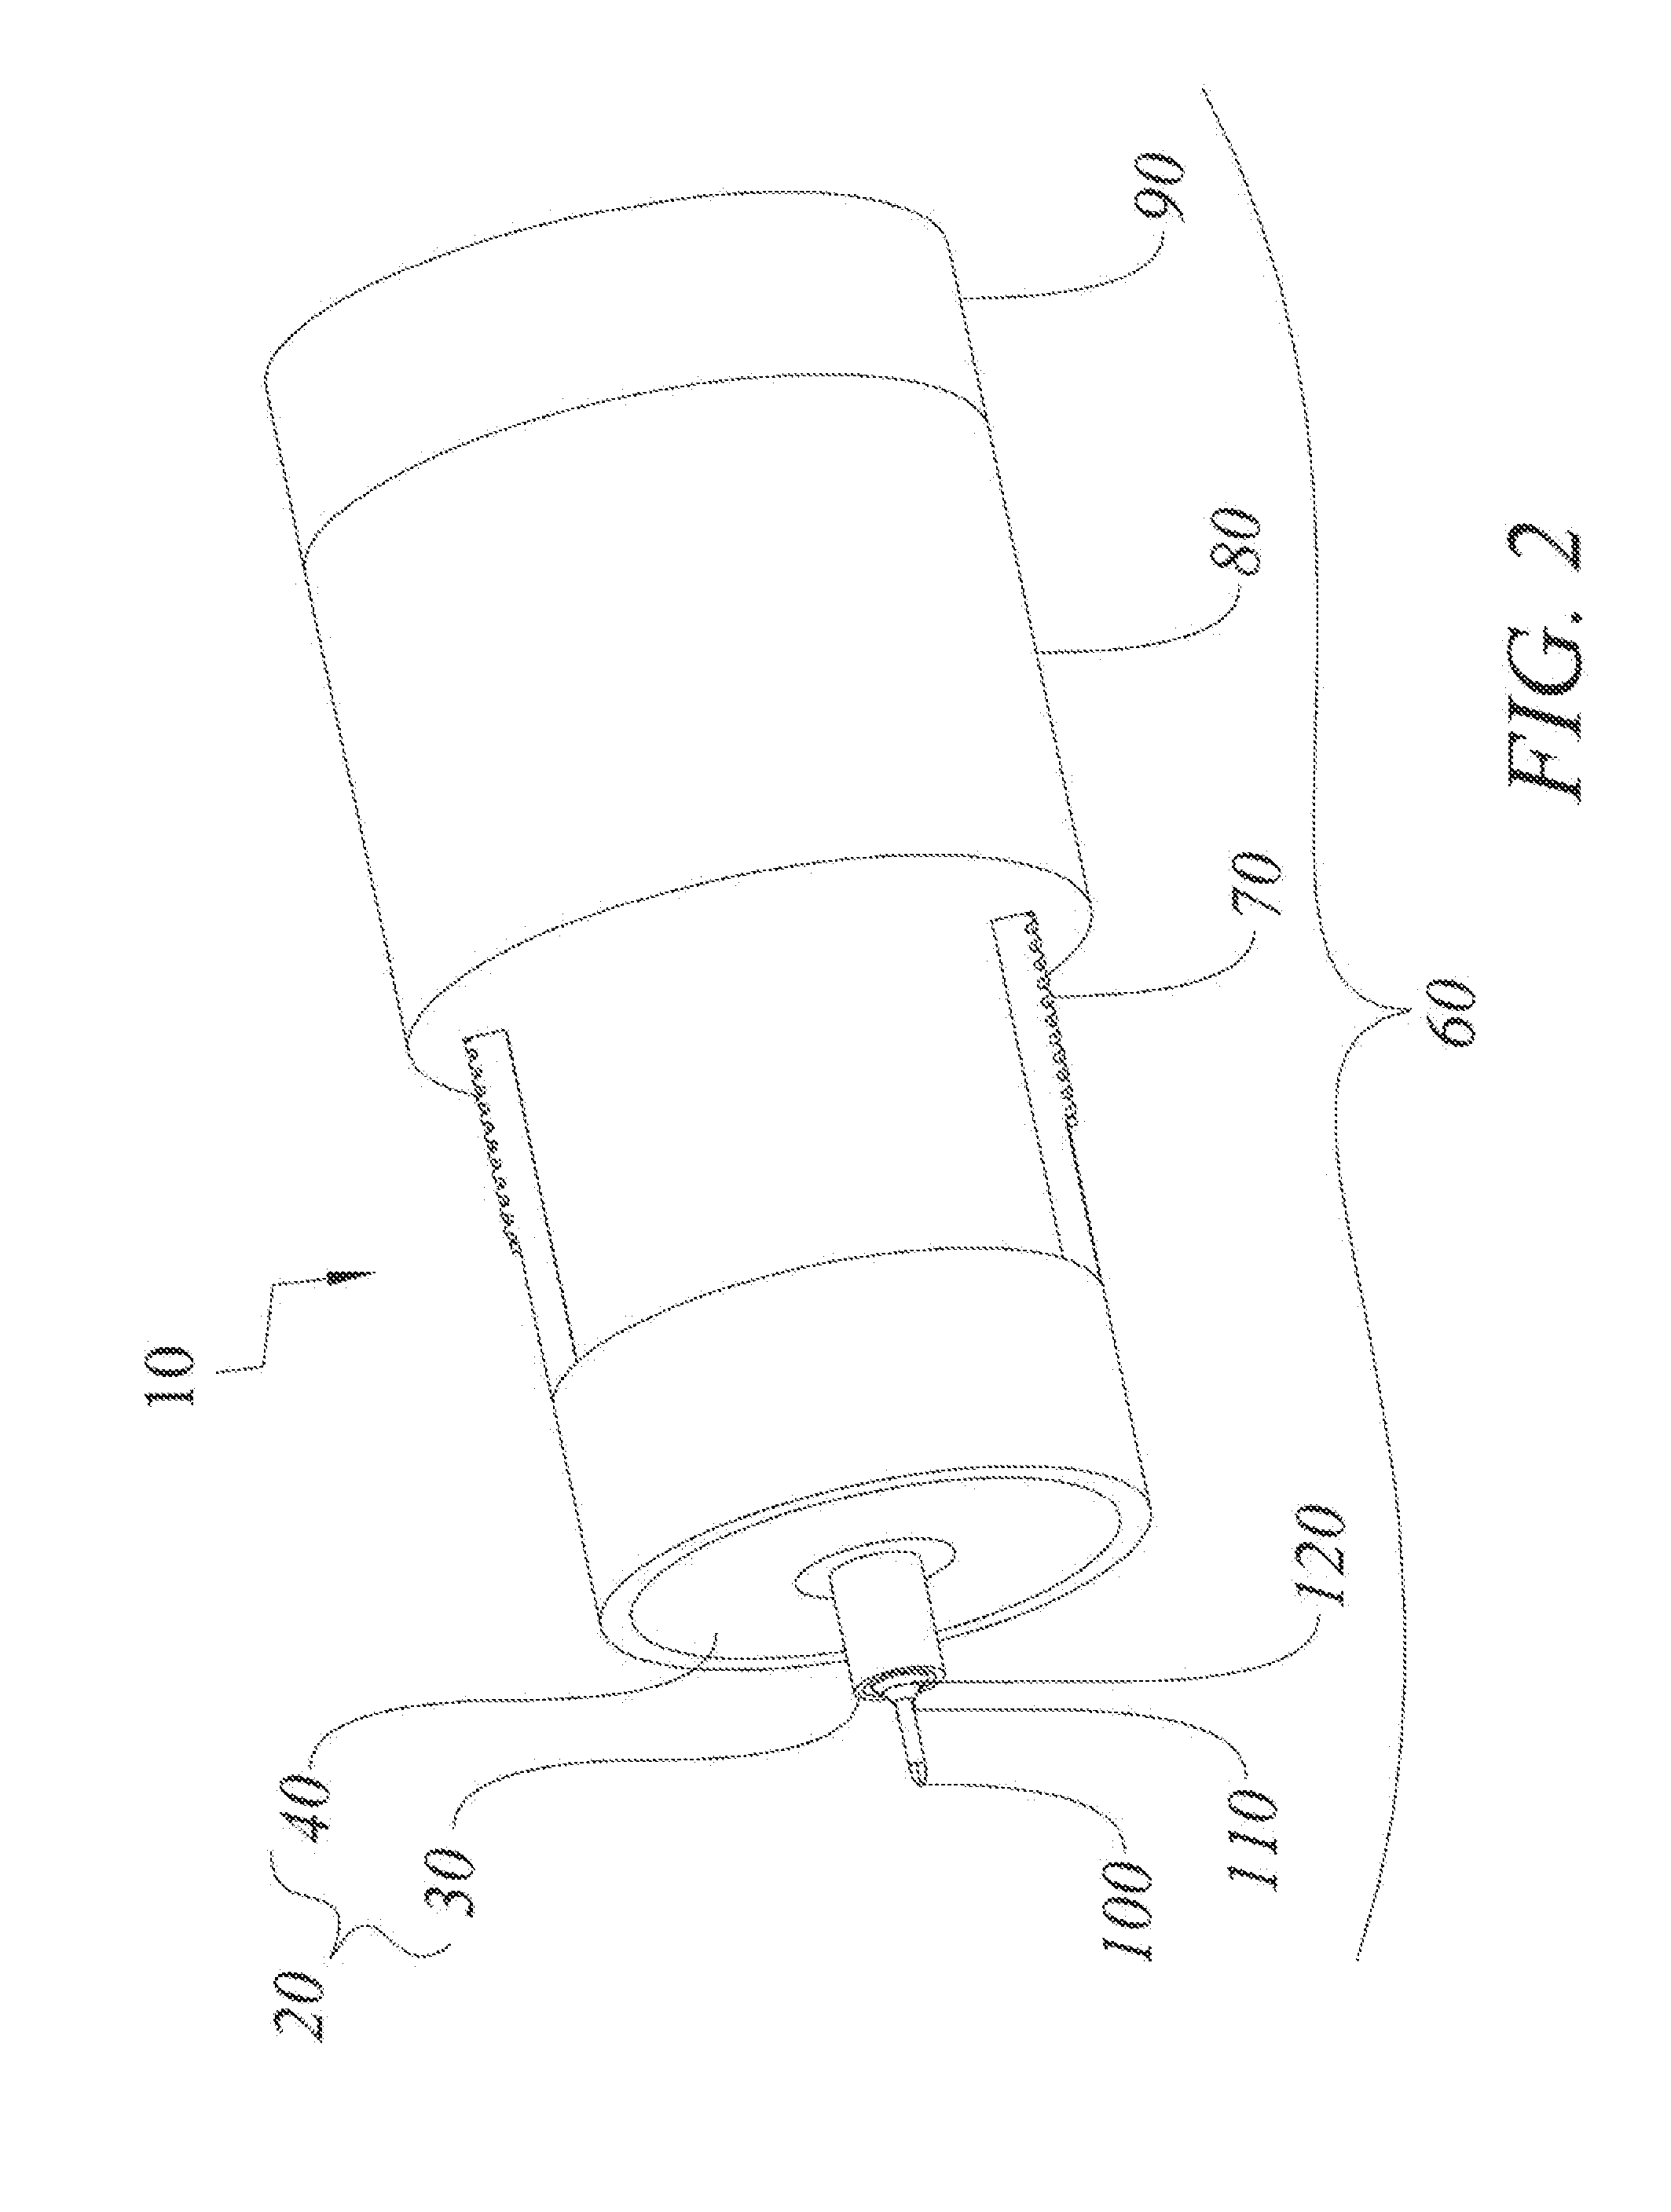 Percutaneous access pathway system and method